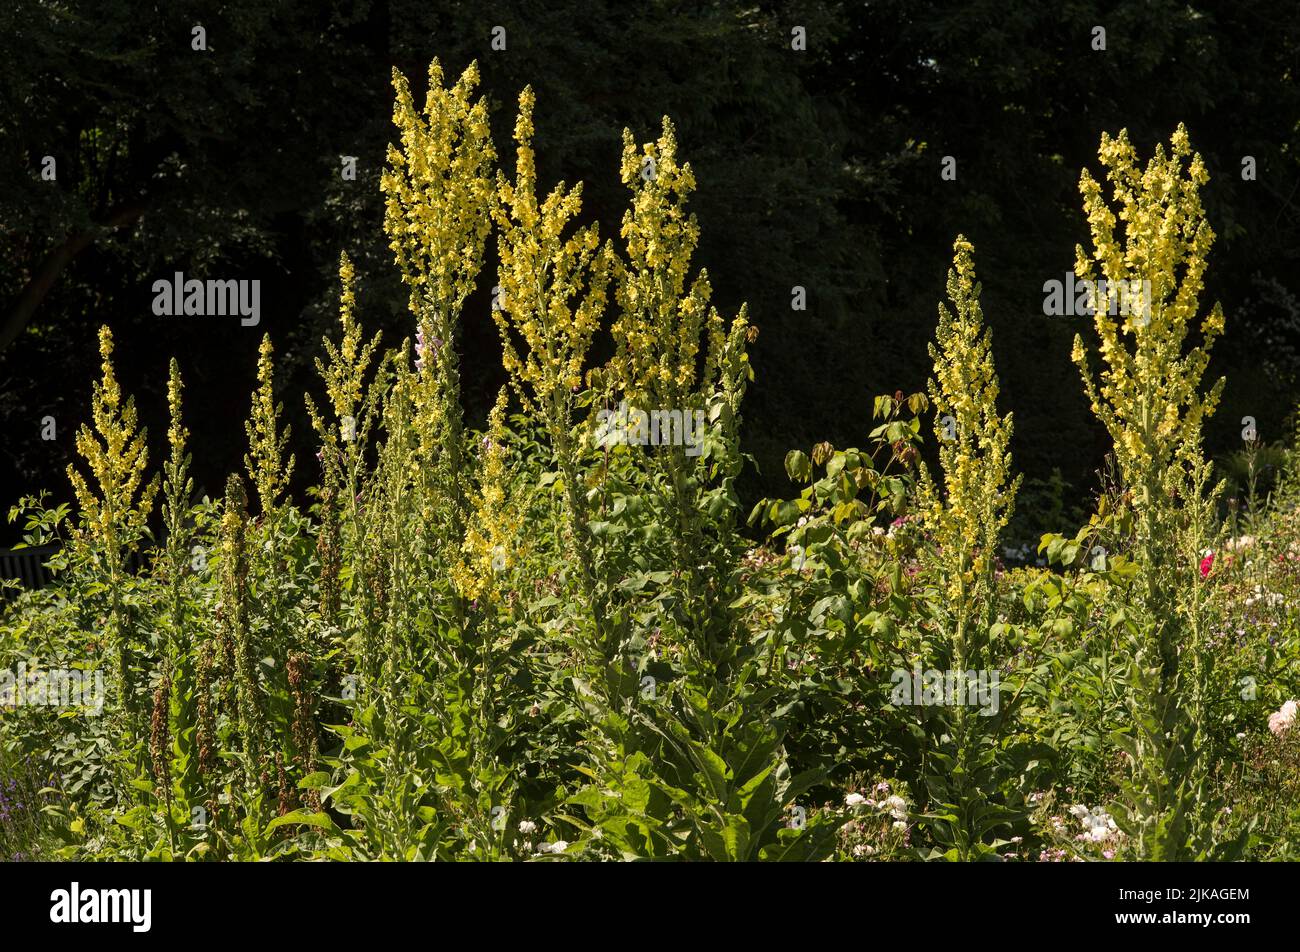 Common Mullein - Verbascum thapsus in the family Scrophulariaceae. Stock Photo